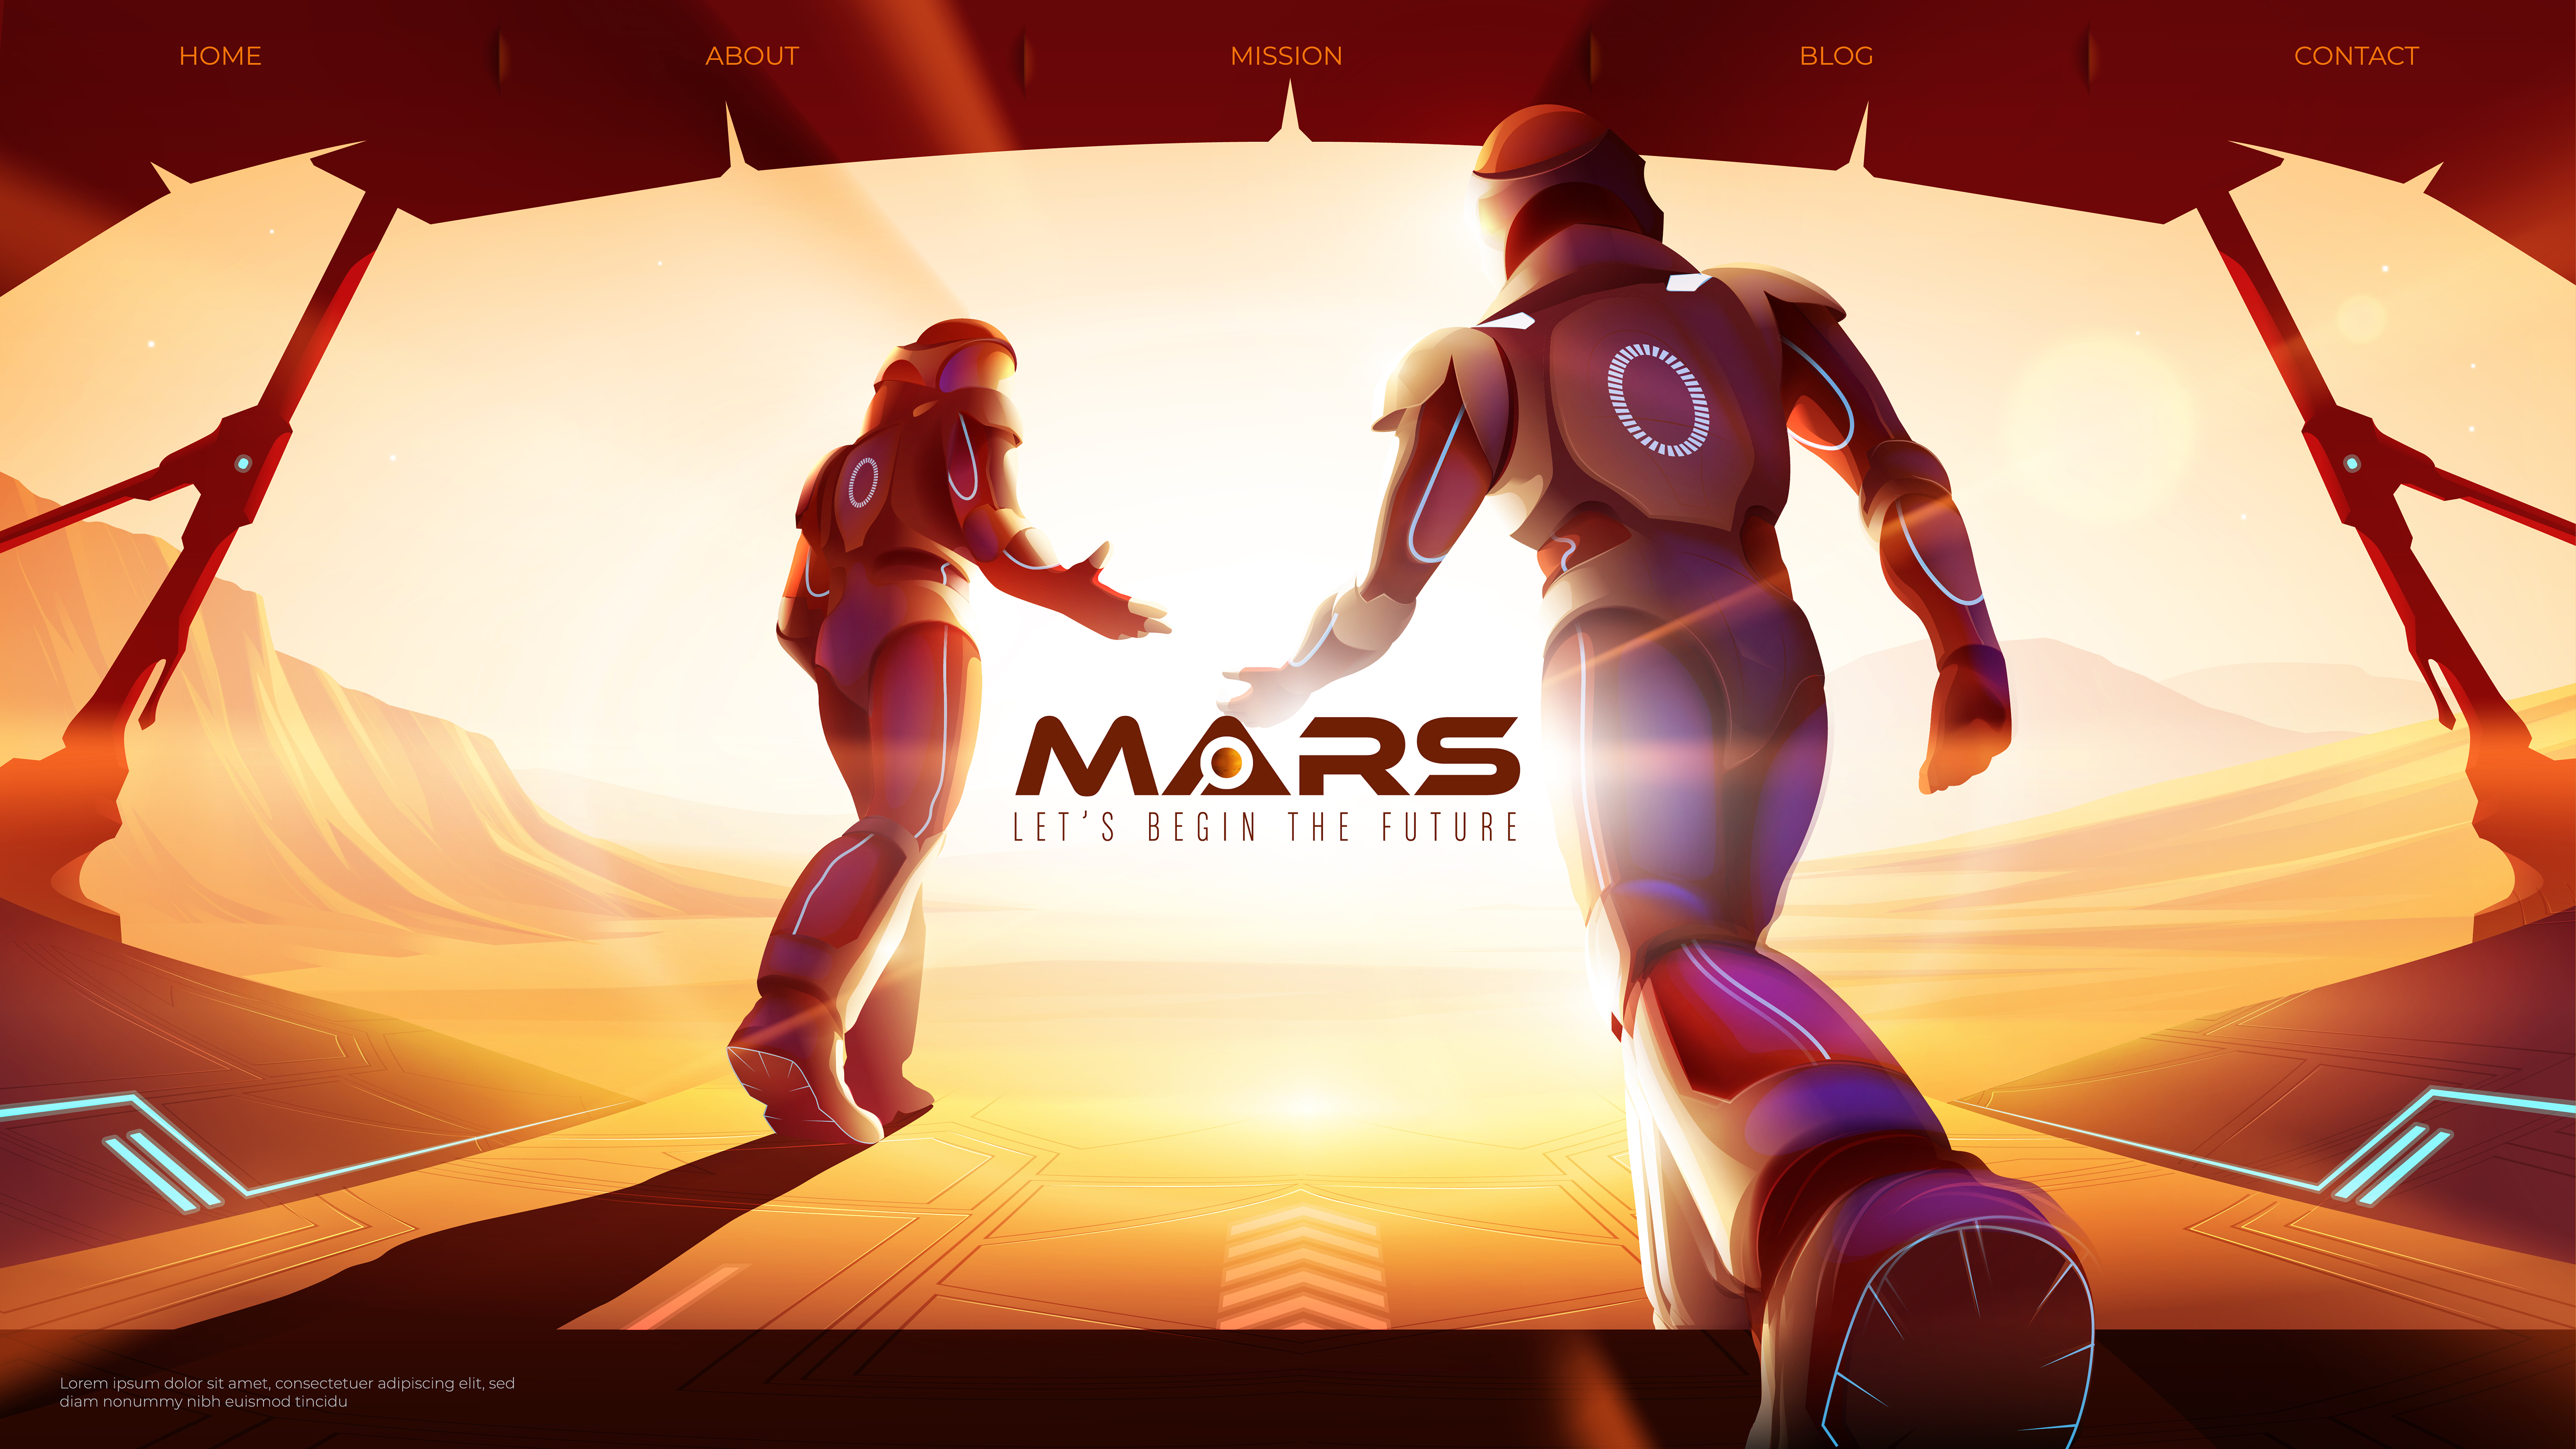 Vector illustration of two astronauts are walking out from the spaceship to the outside on Mars, ready for the greatest exploration